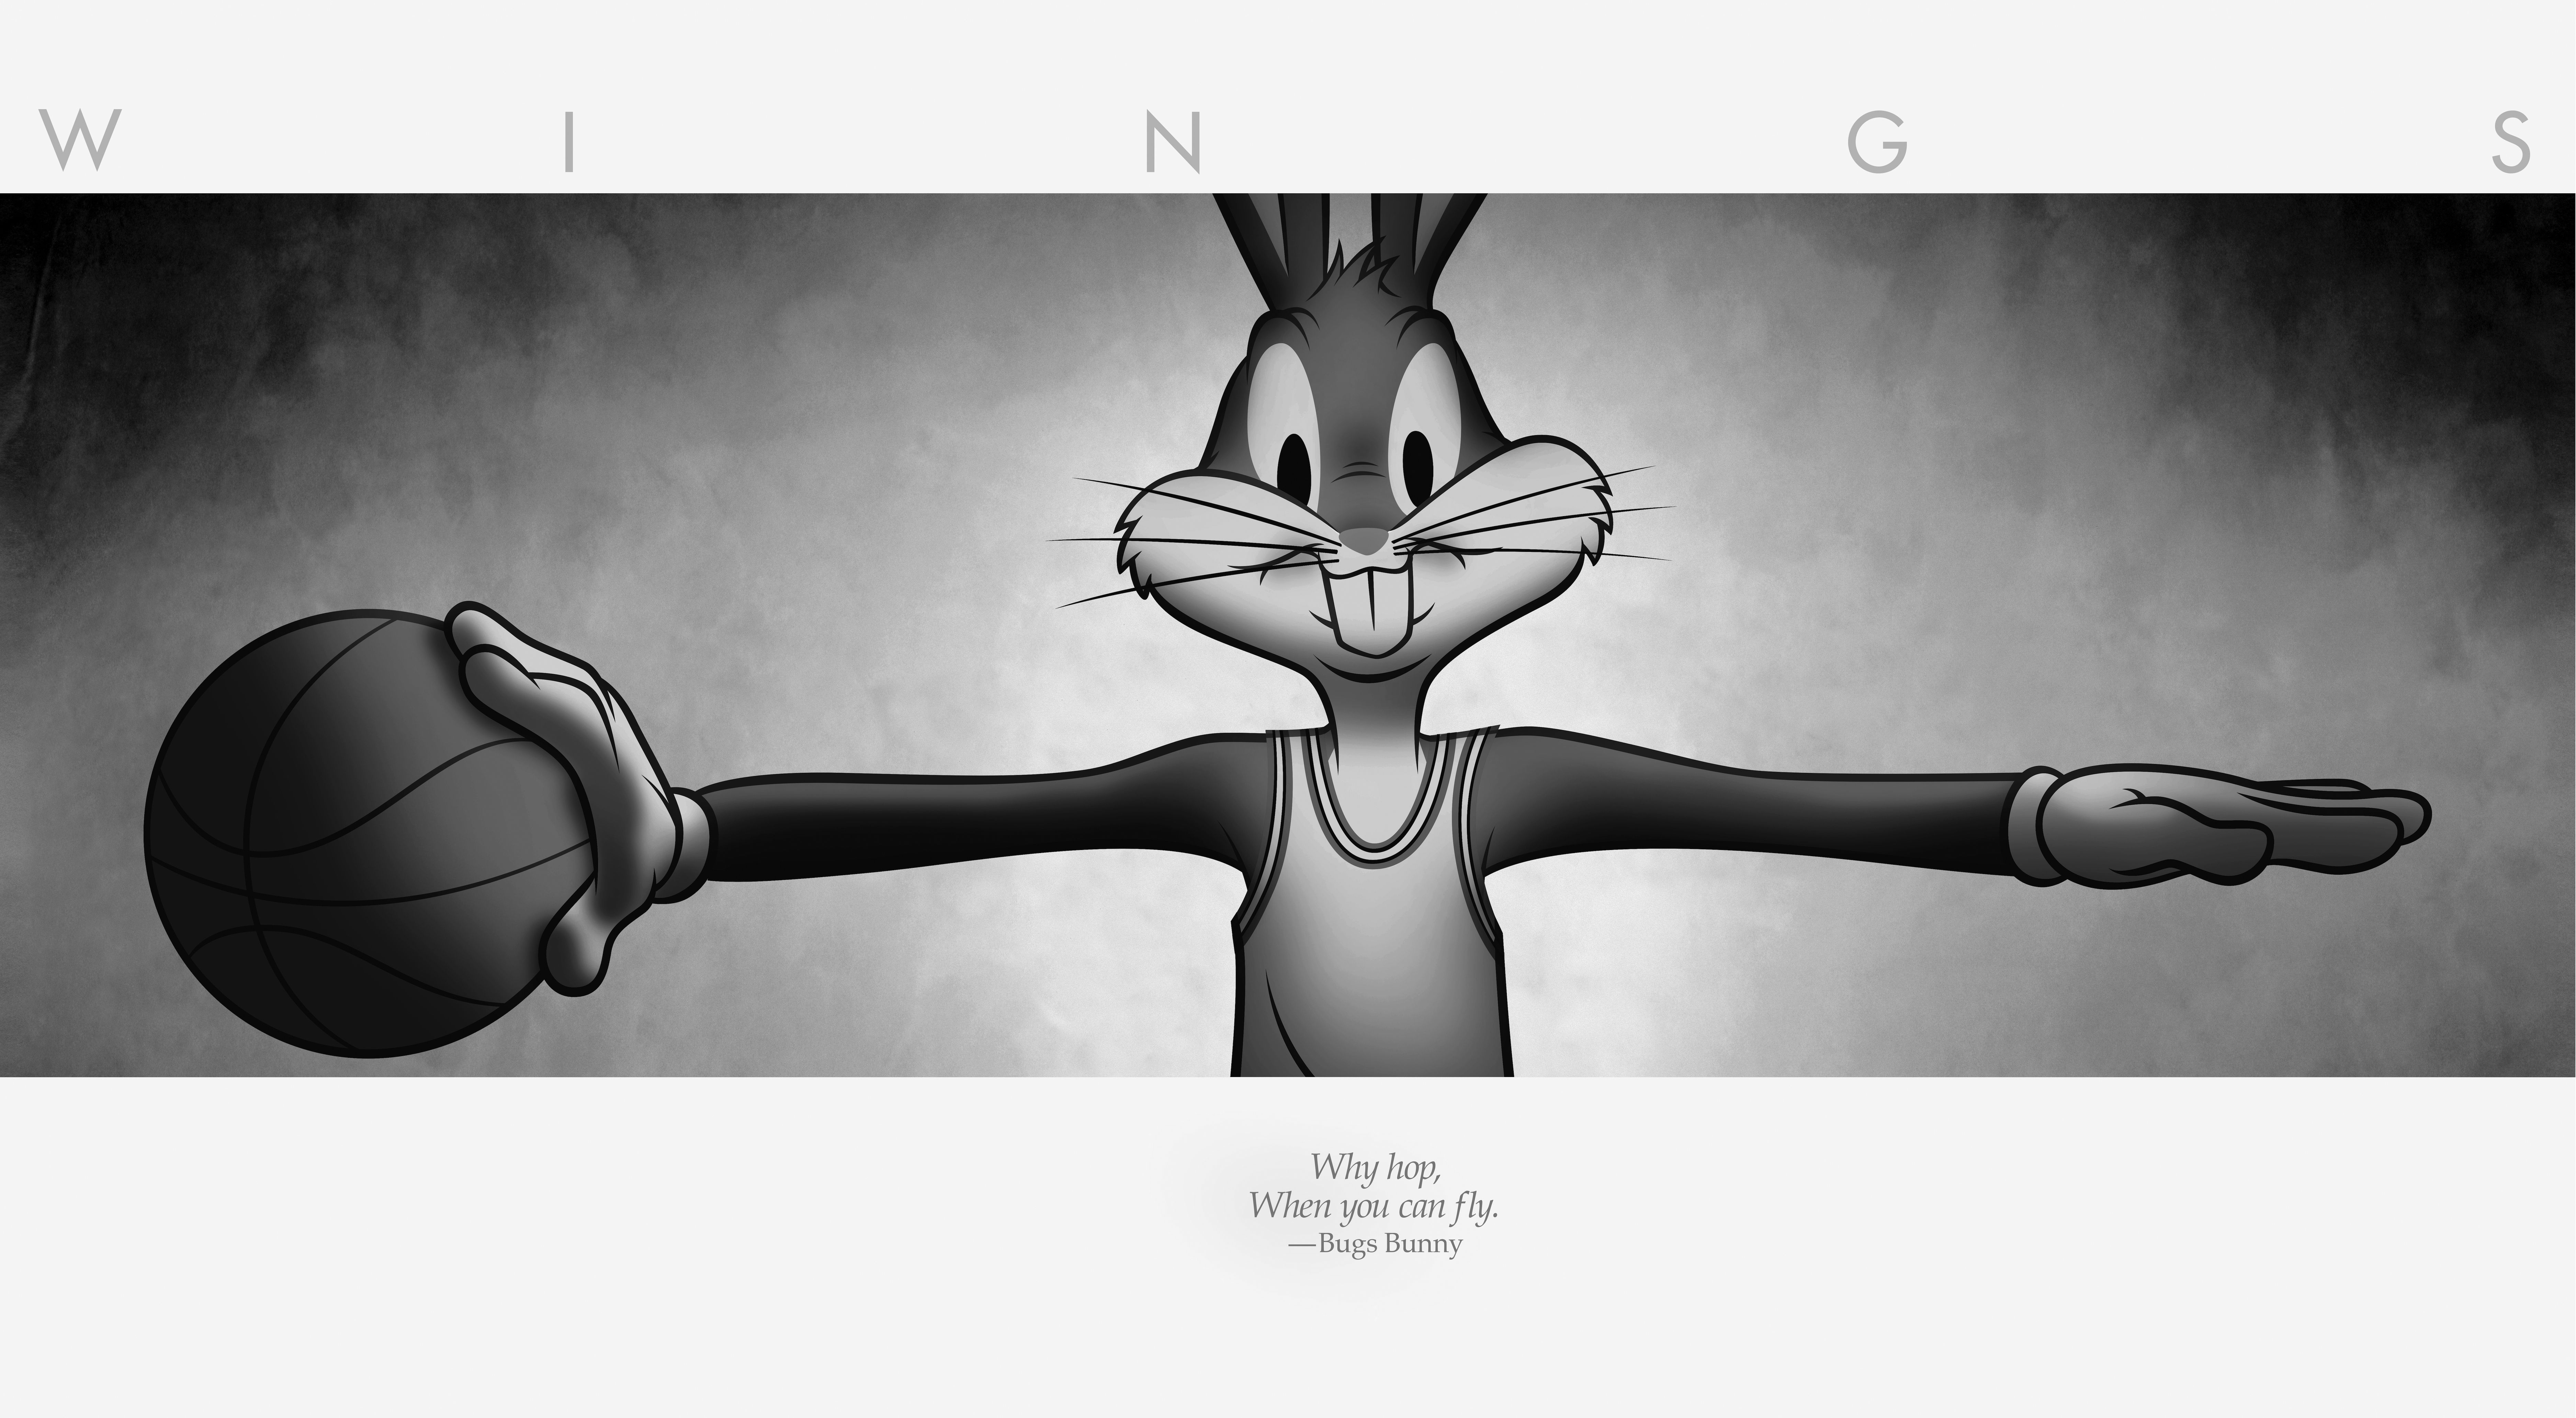 Bugs Bunny from Looney Tunes holding a basketball and wearing a basketball jersey. - Bugs Bunny